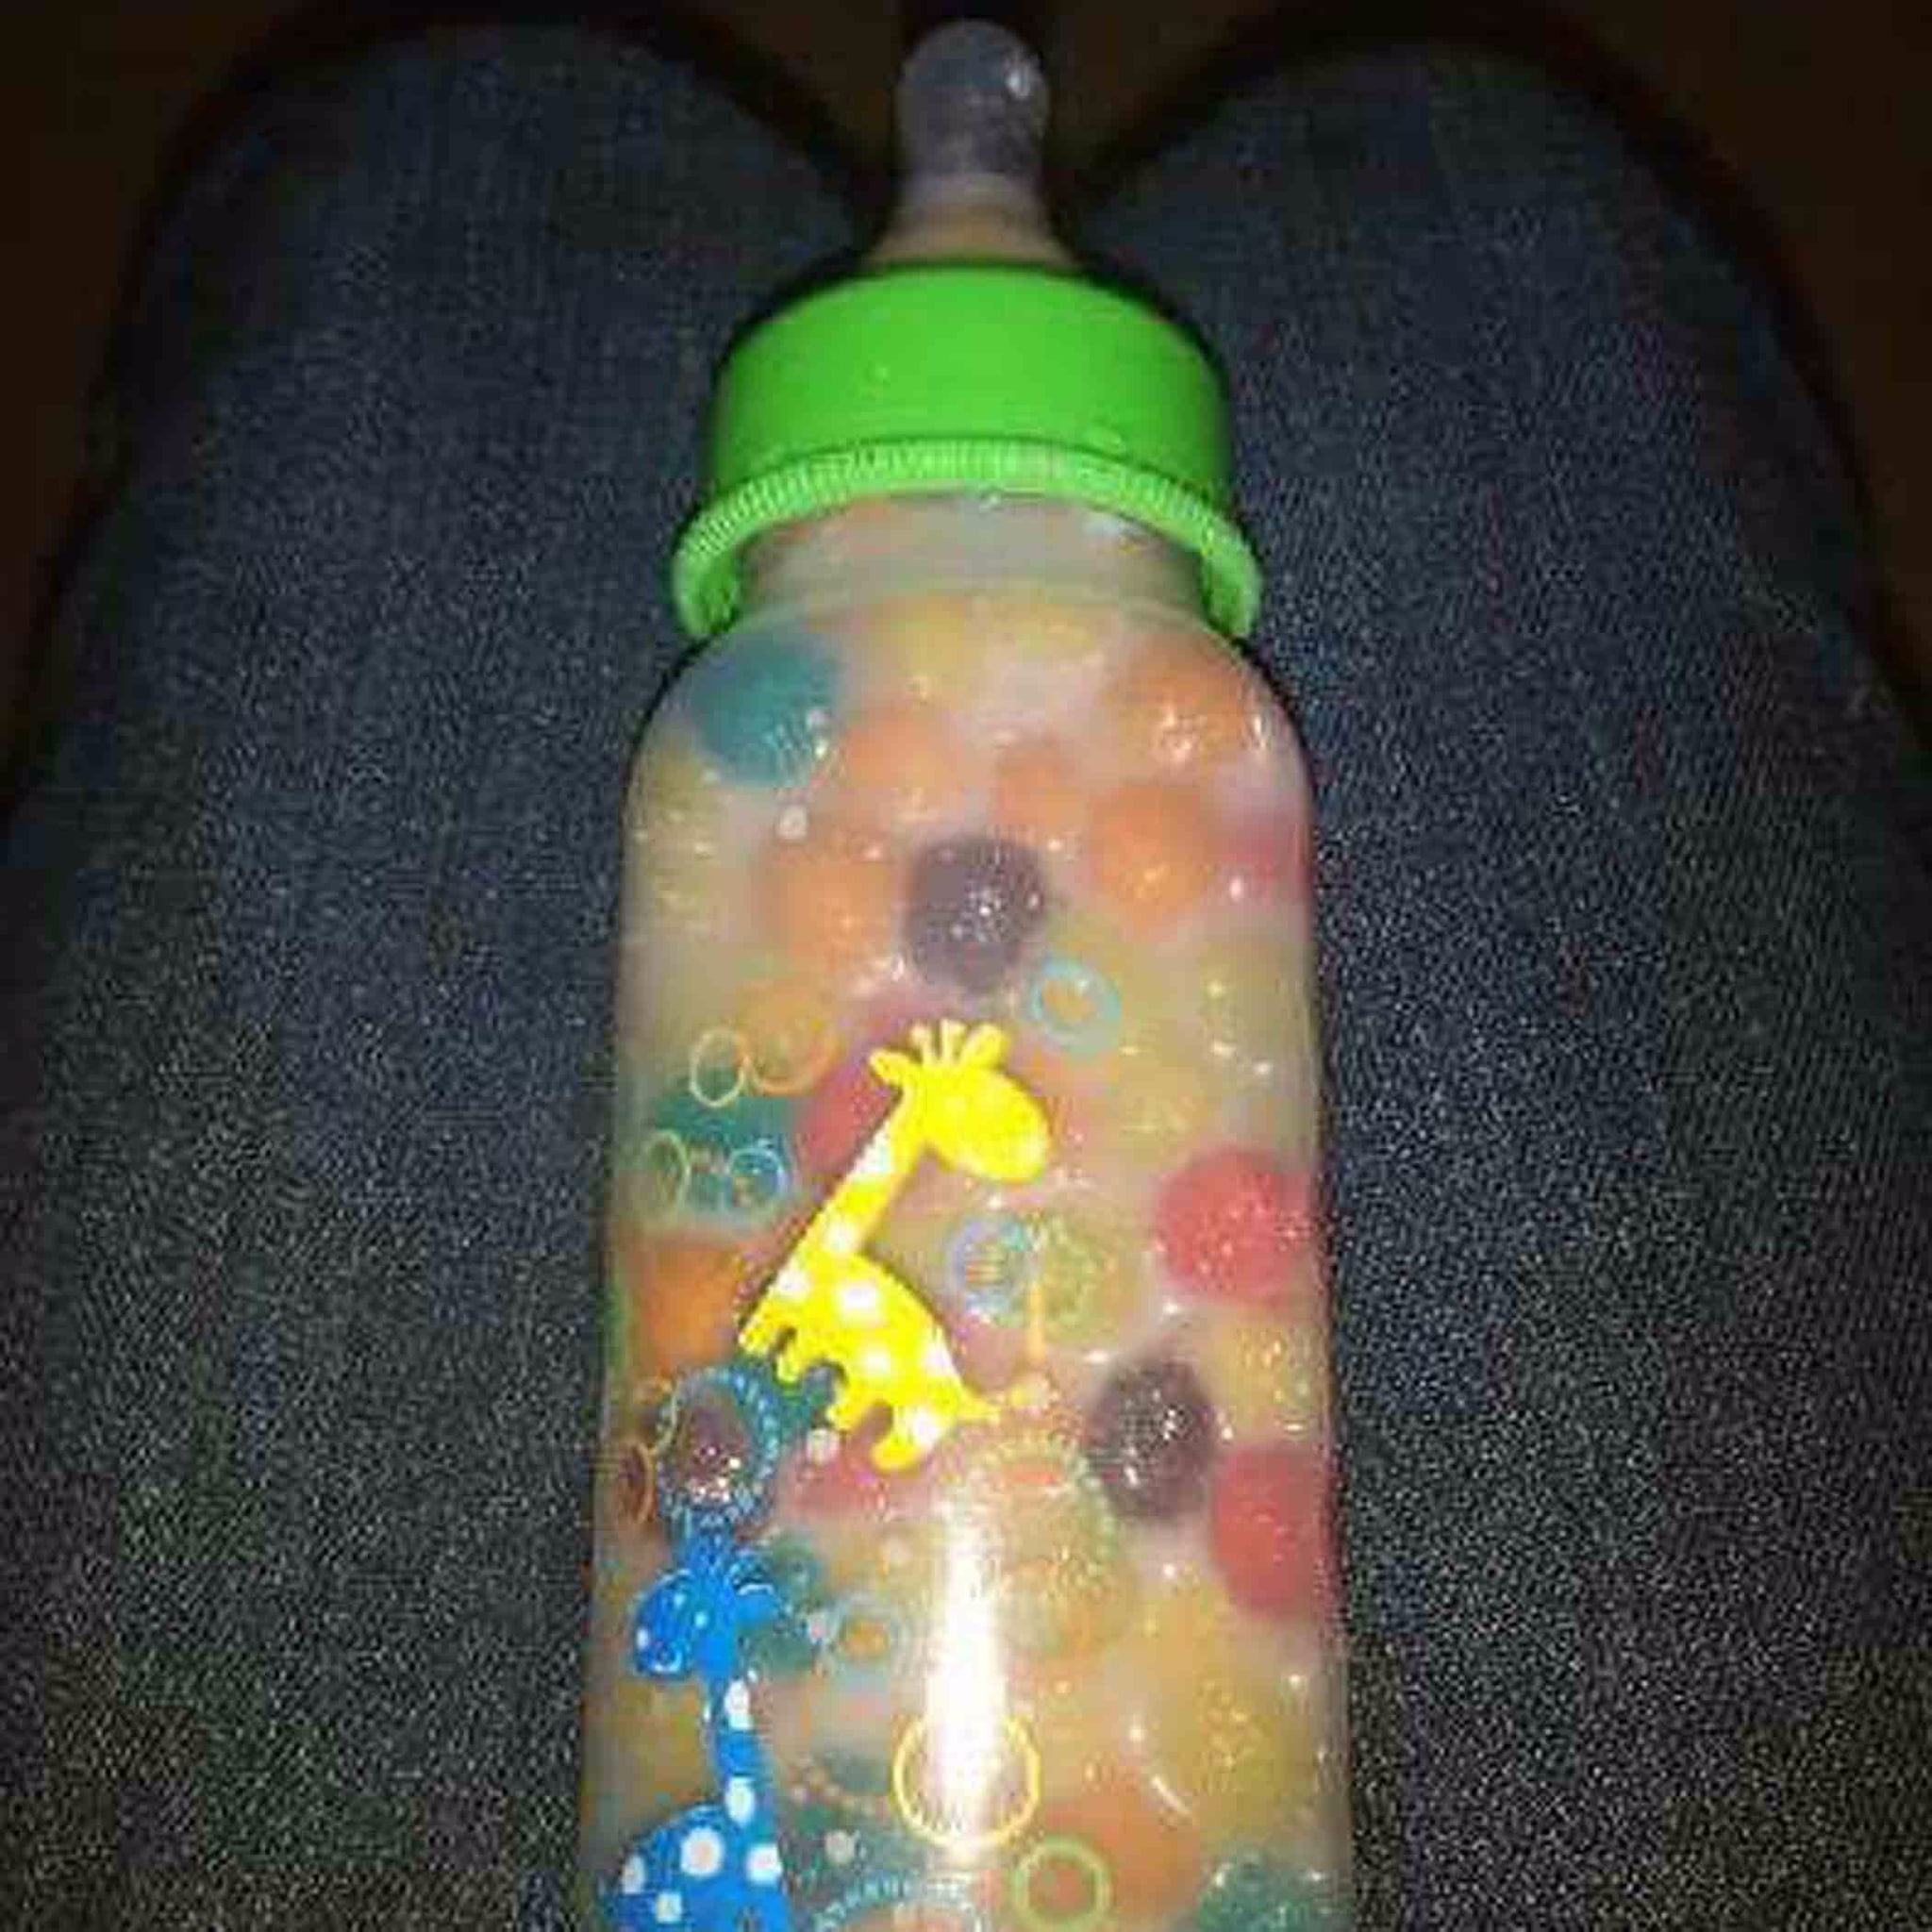 when can u put cereal in a baby's bottle